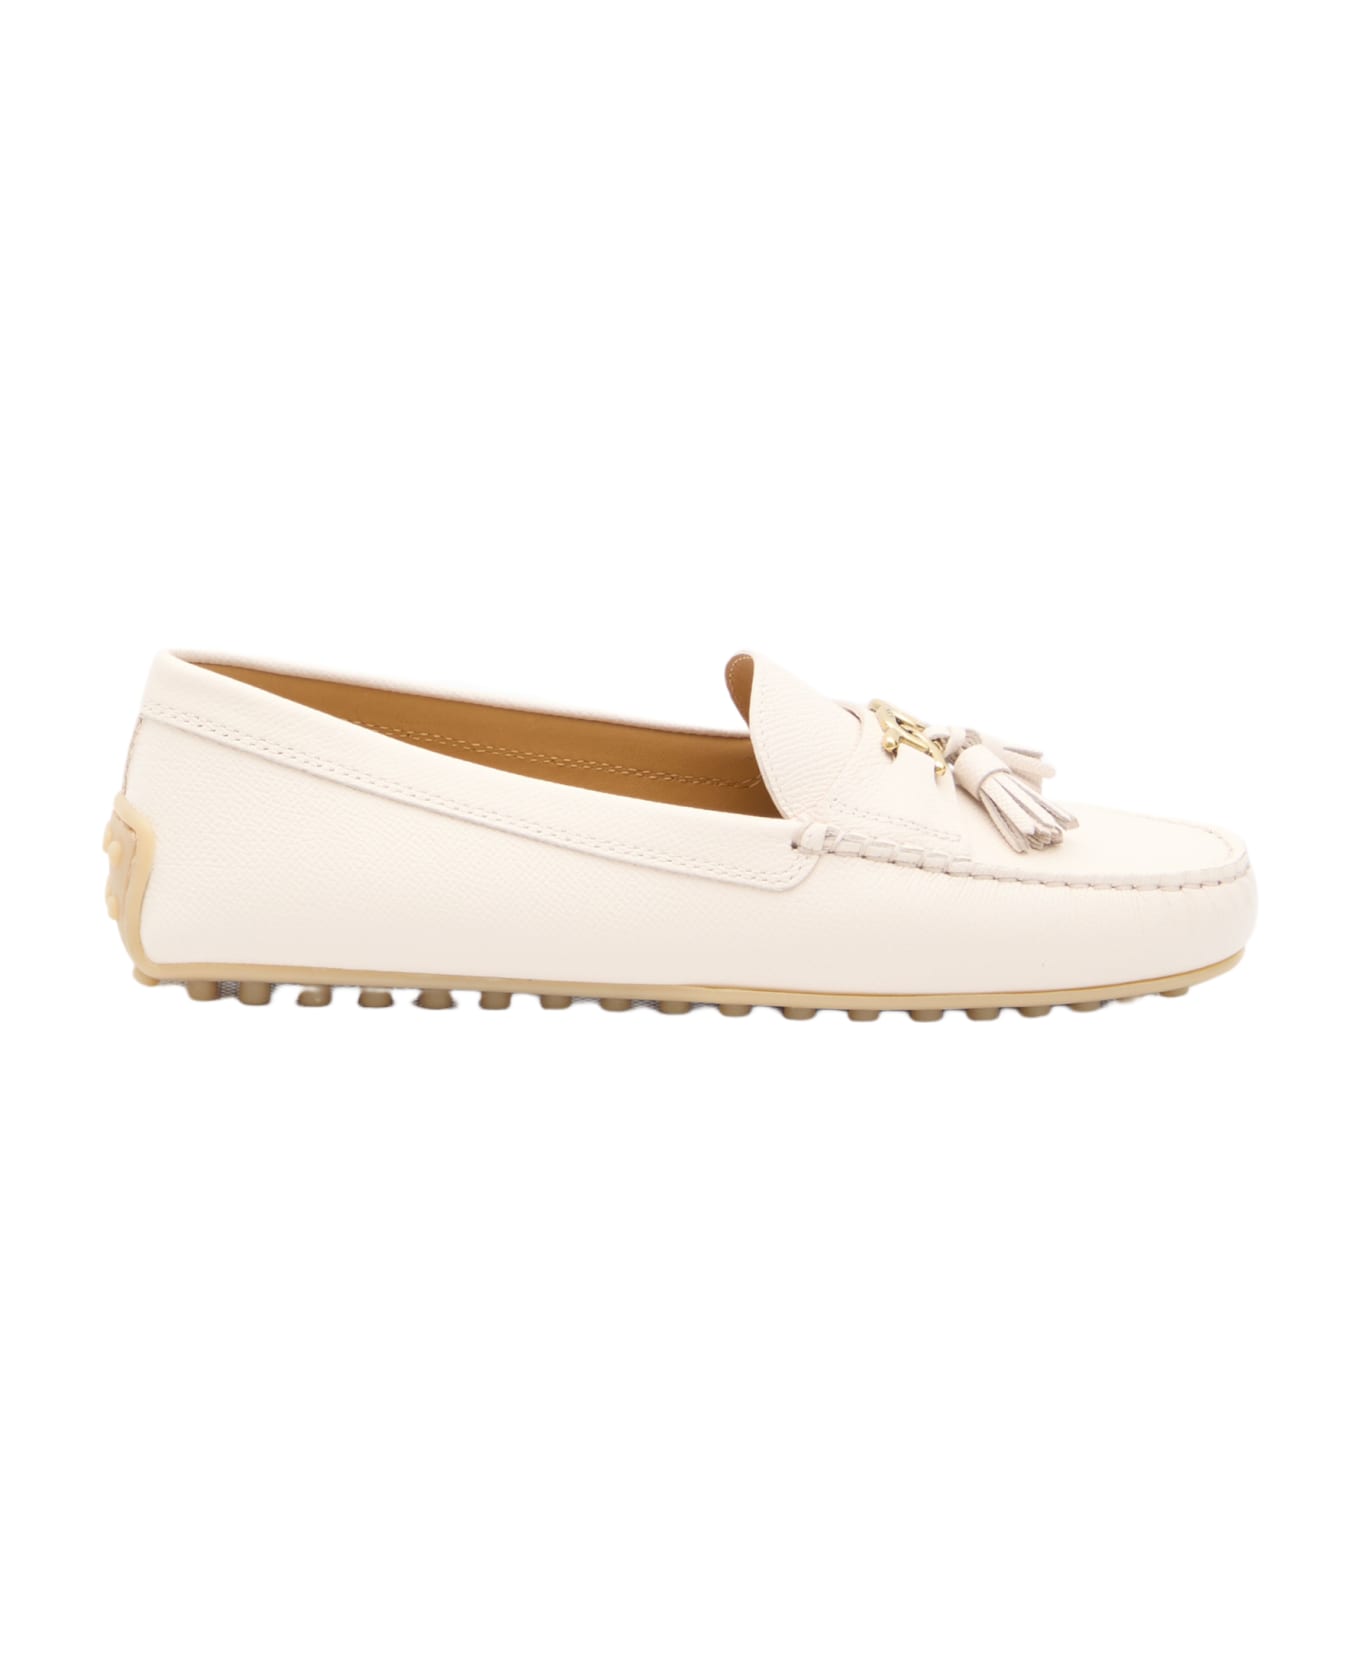 Tod's City Gommino Loafers - BEIGE フラットシューズ